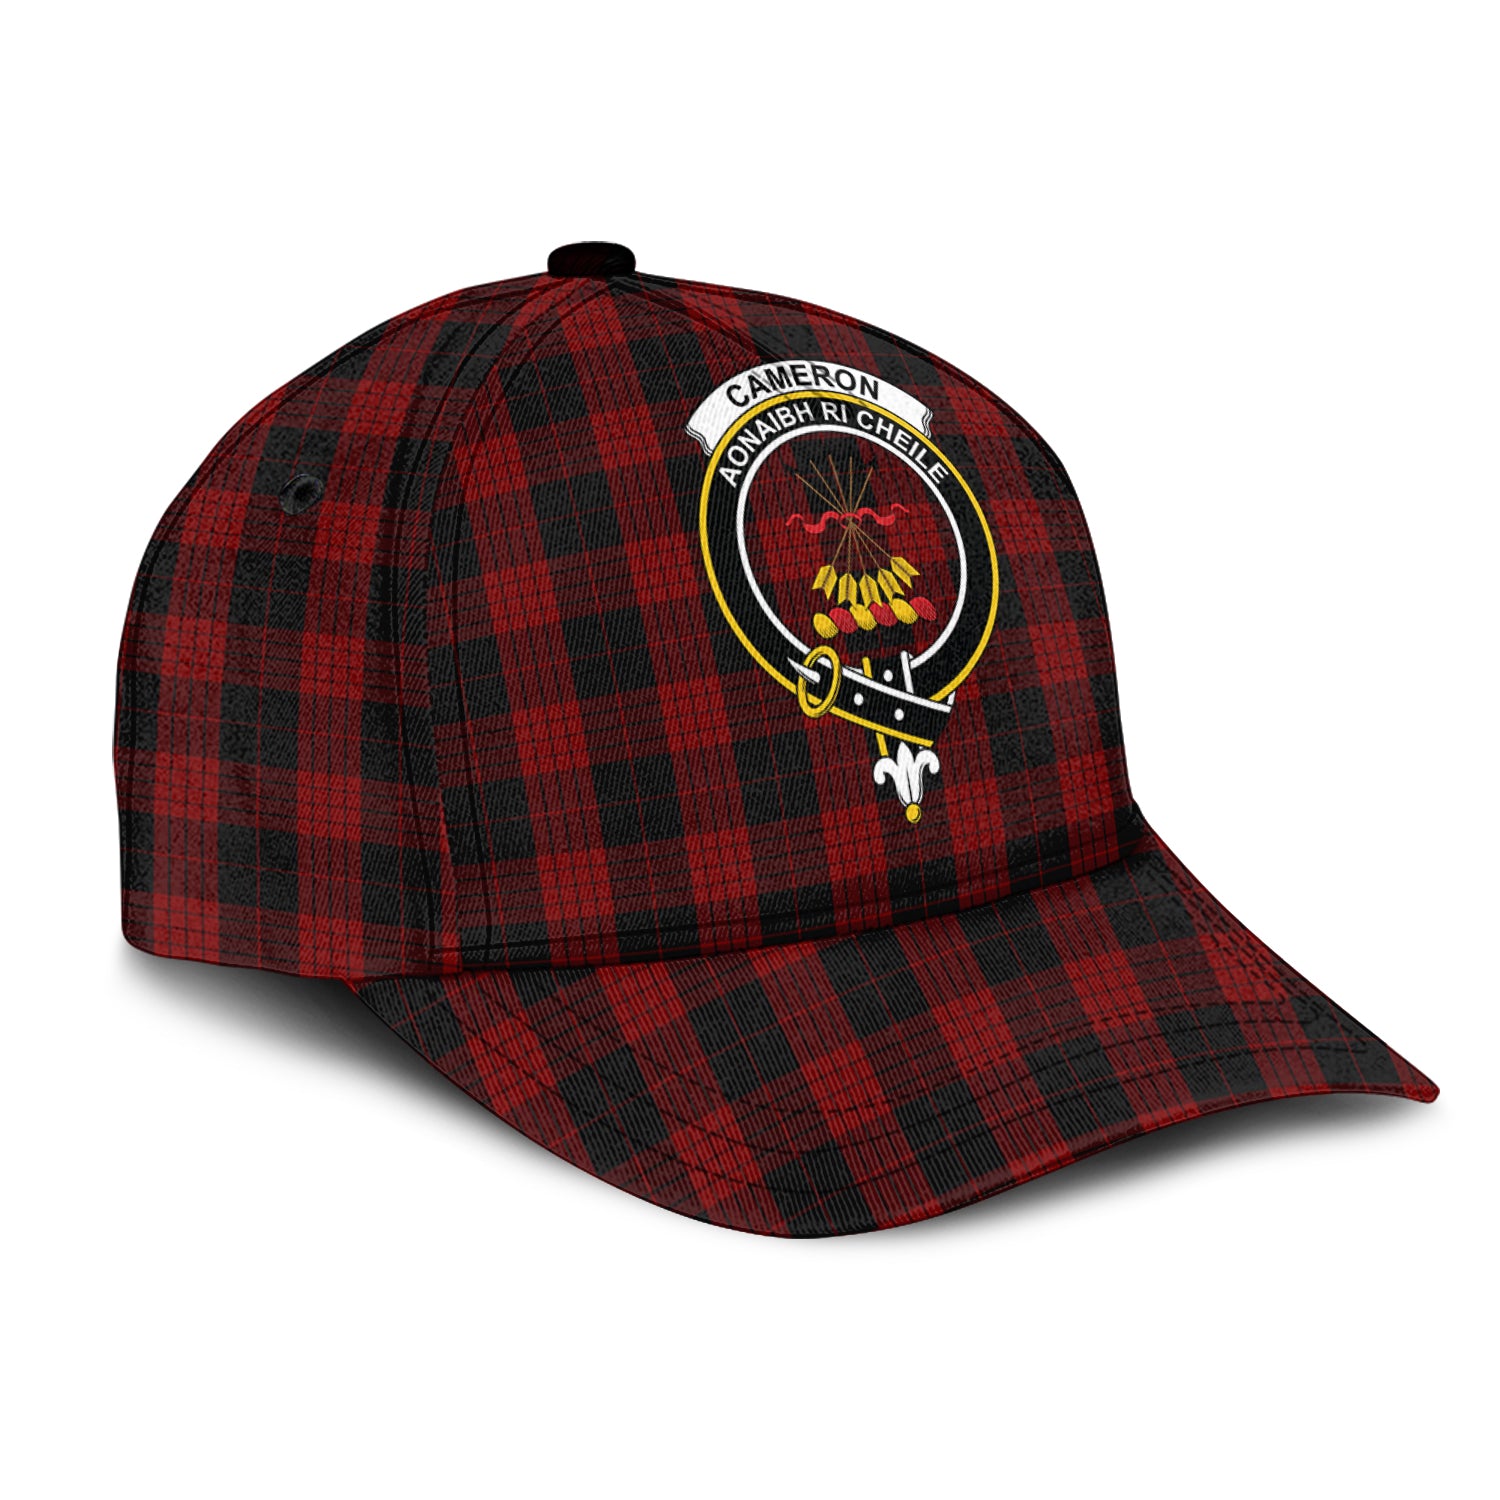 cameron-black-and-red-tartan-classic-cap-with-family-crest